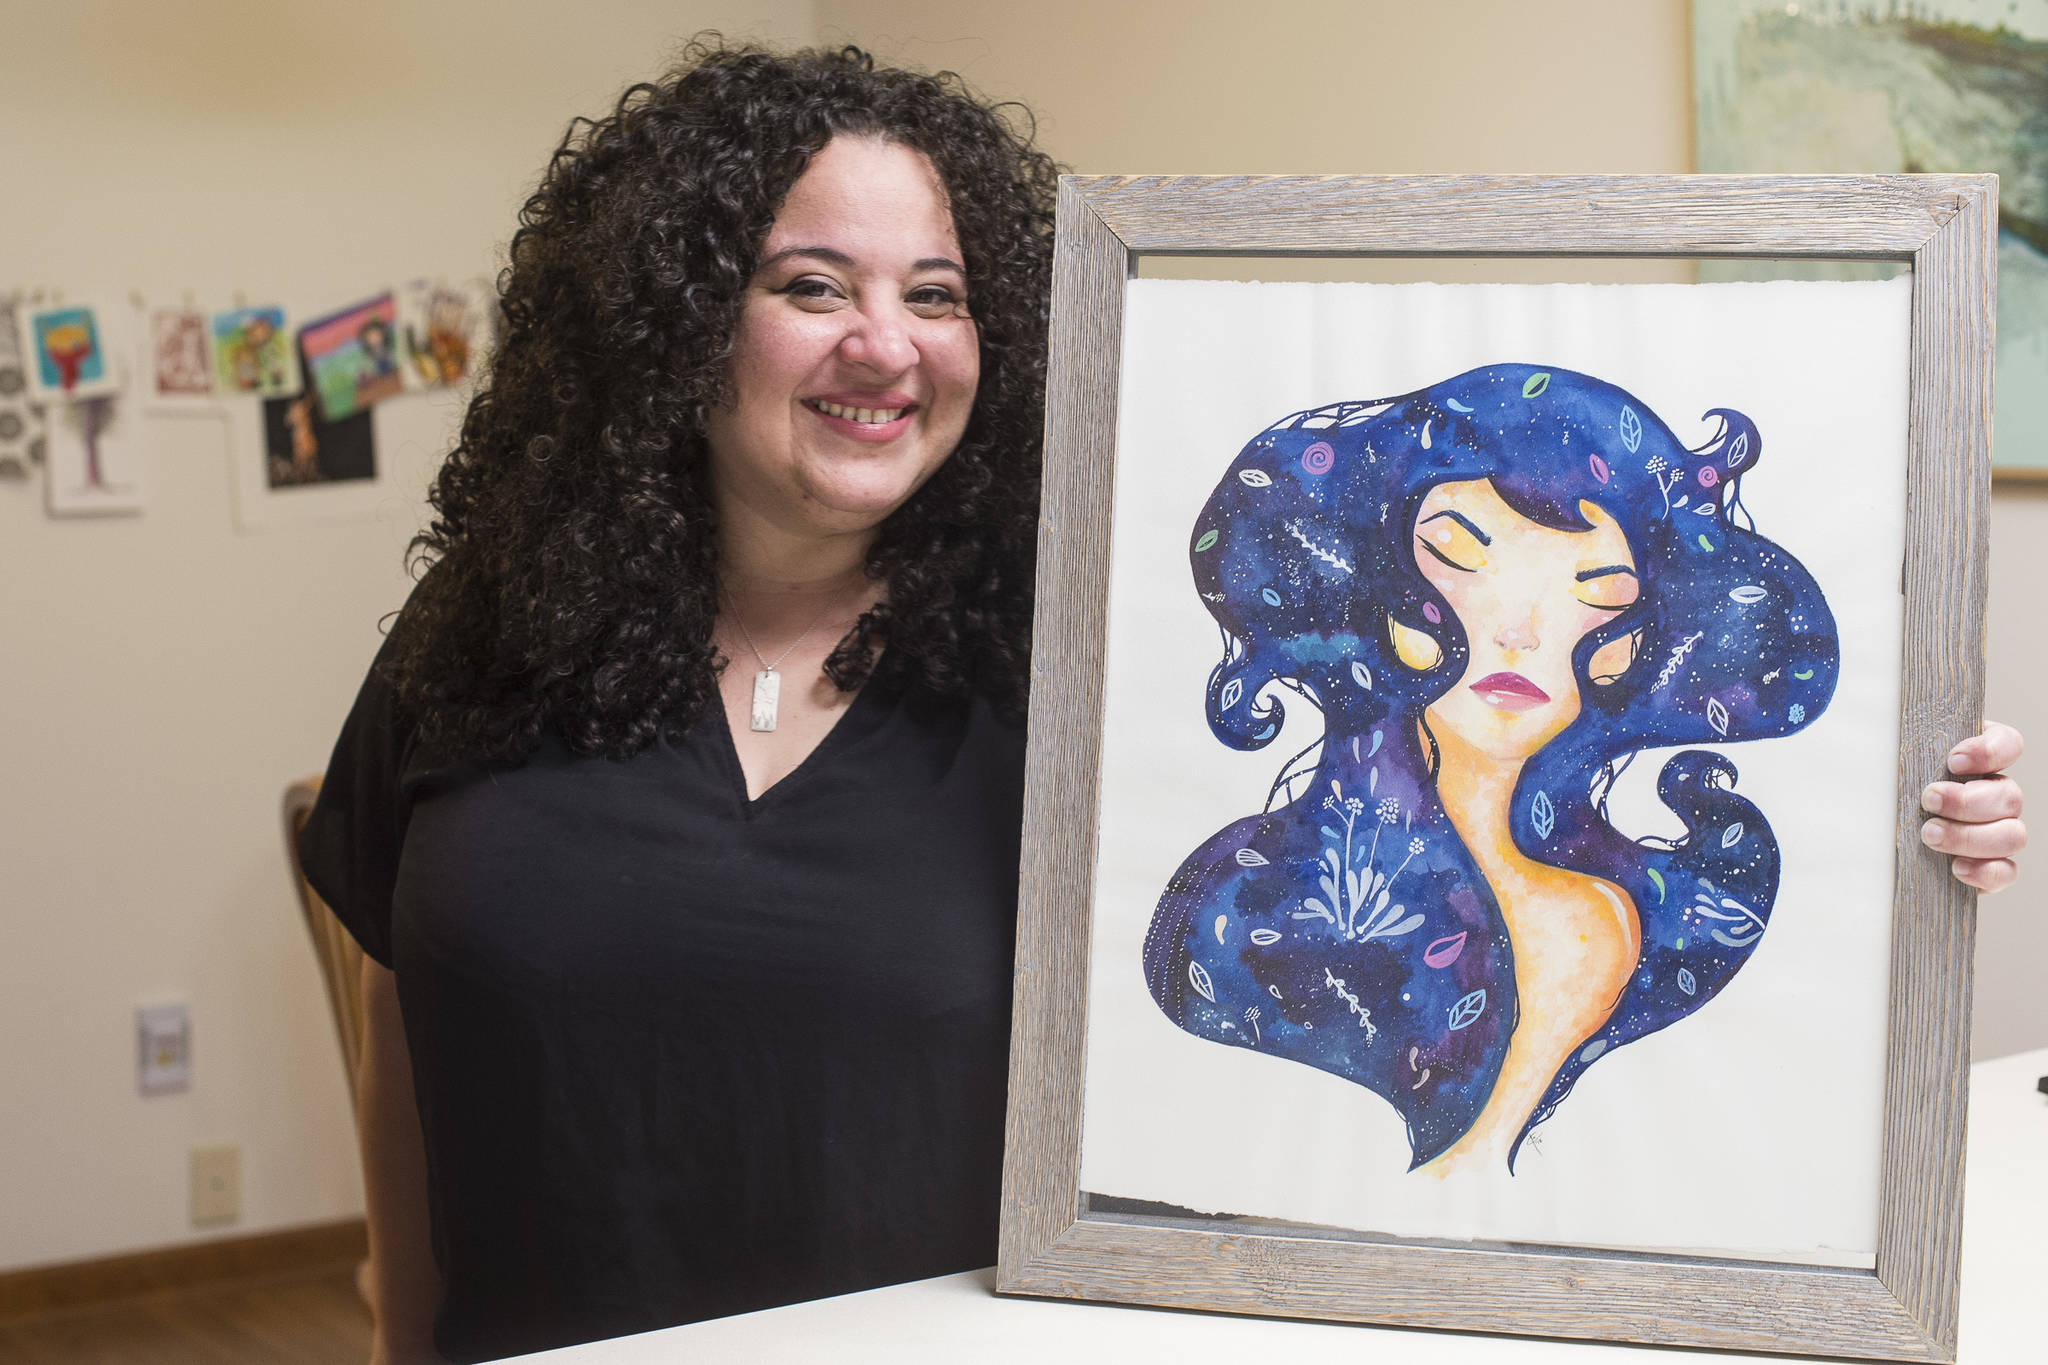 Glo Ramirez shows off her artwork at her Juneau apartment on Monday, Dec. 31, 2018. (Michael Penn | Capital City Weekly)